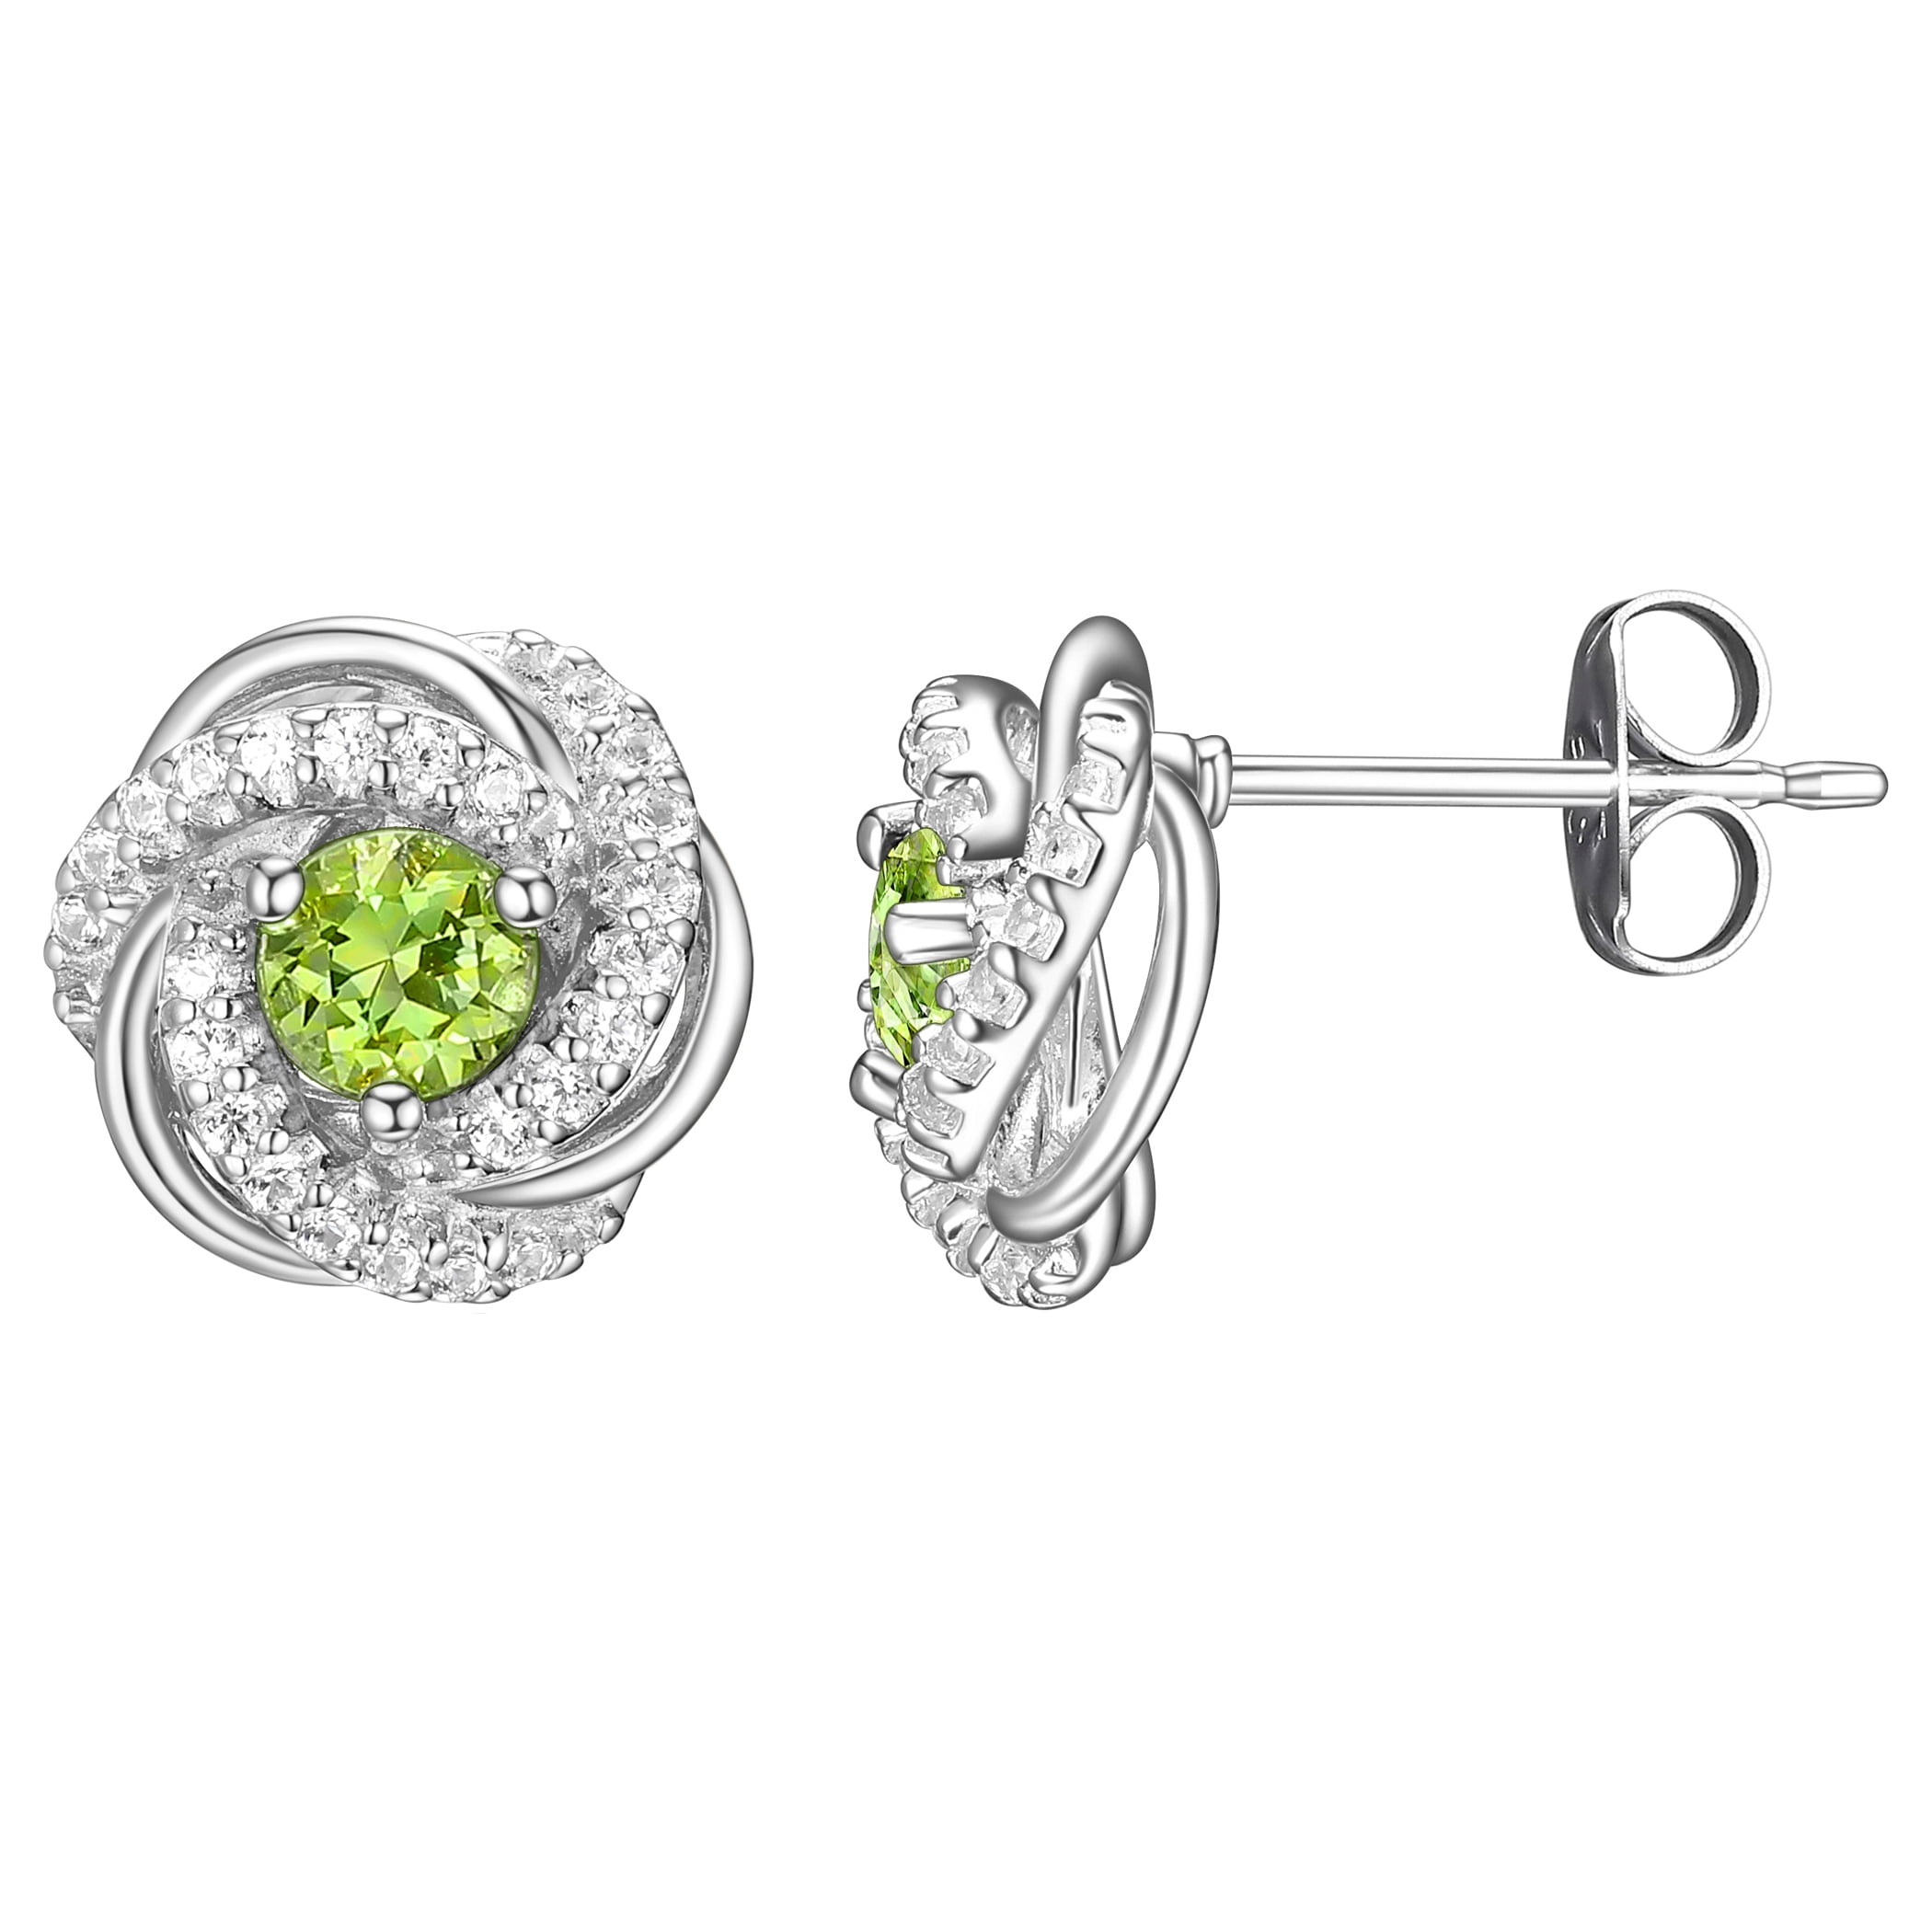 Birthday Gift Wedding Gift For Her Christmas Gift Natural Peridot Gemstone 925 Sterling Silver Handmade Floral Earring Anniversary Gift